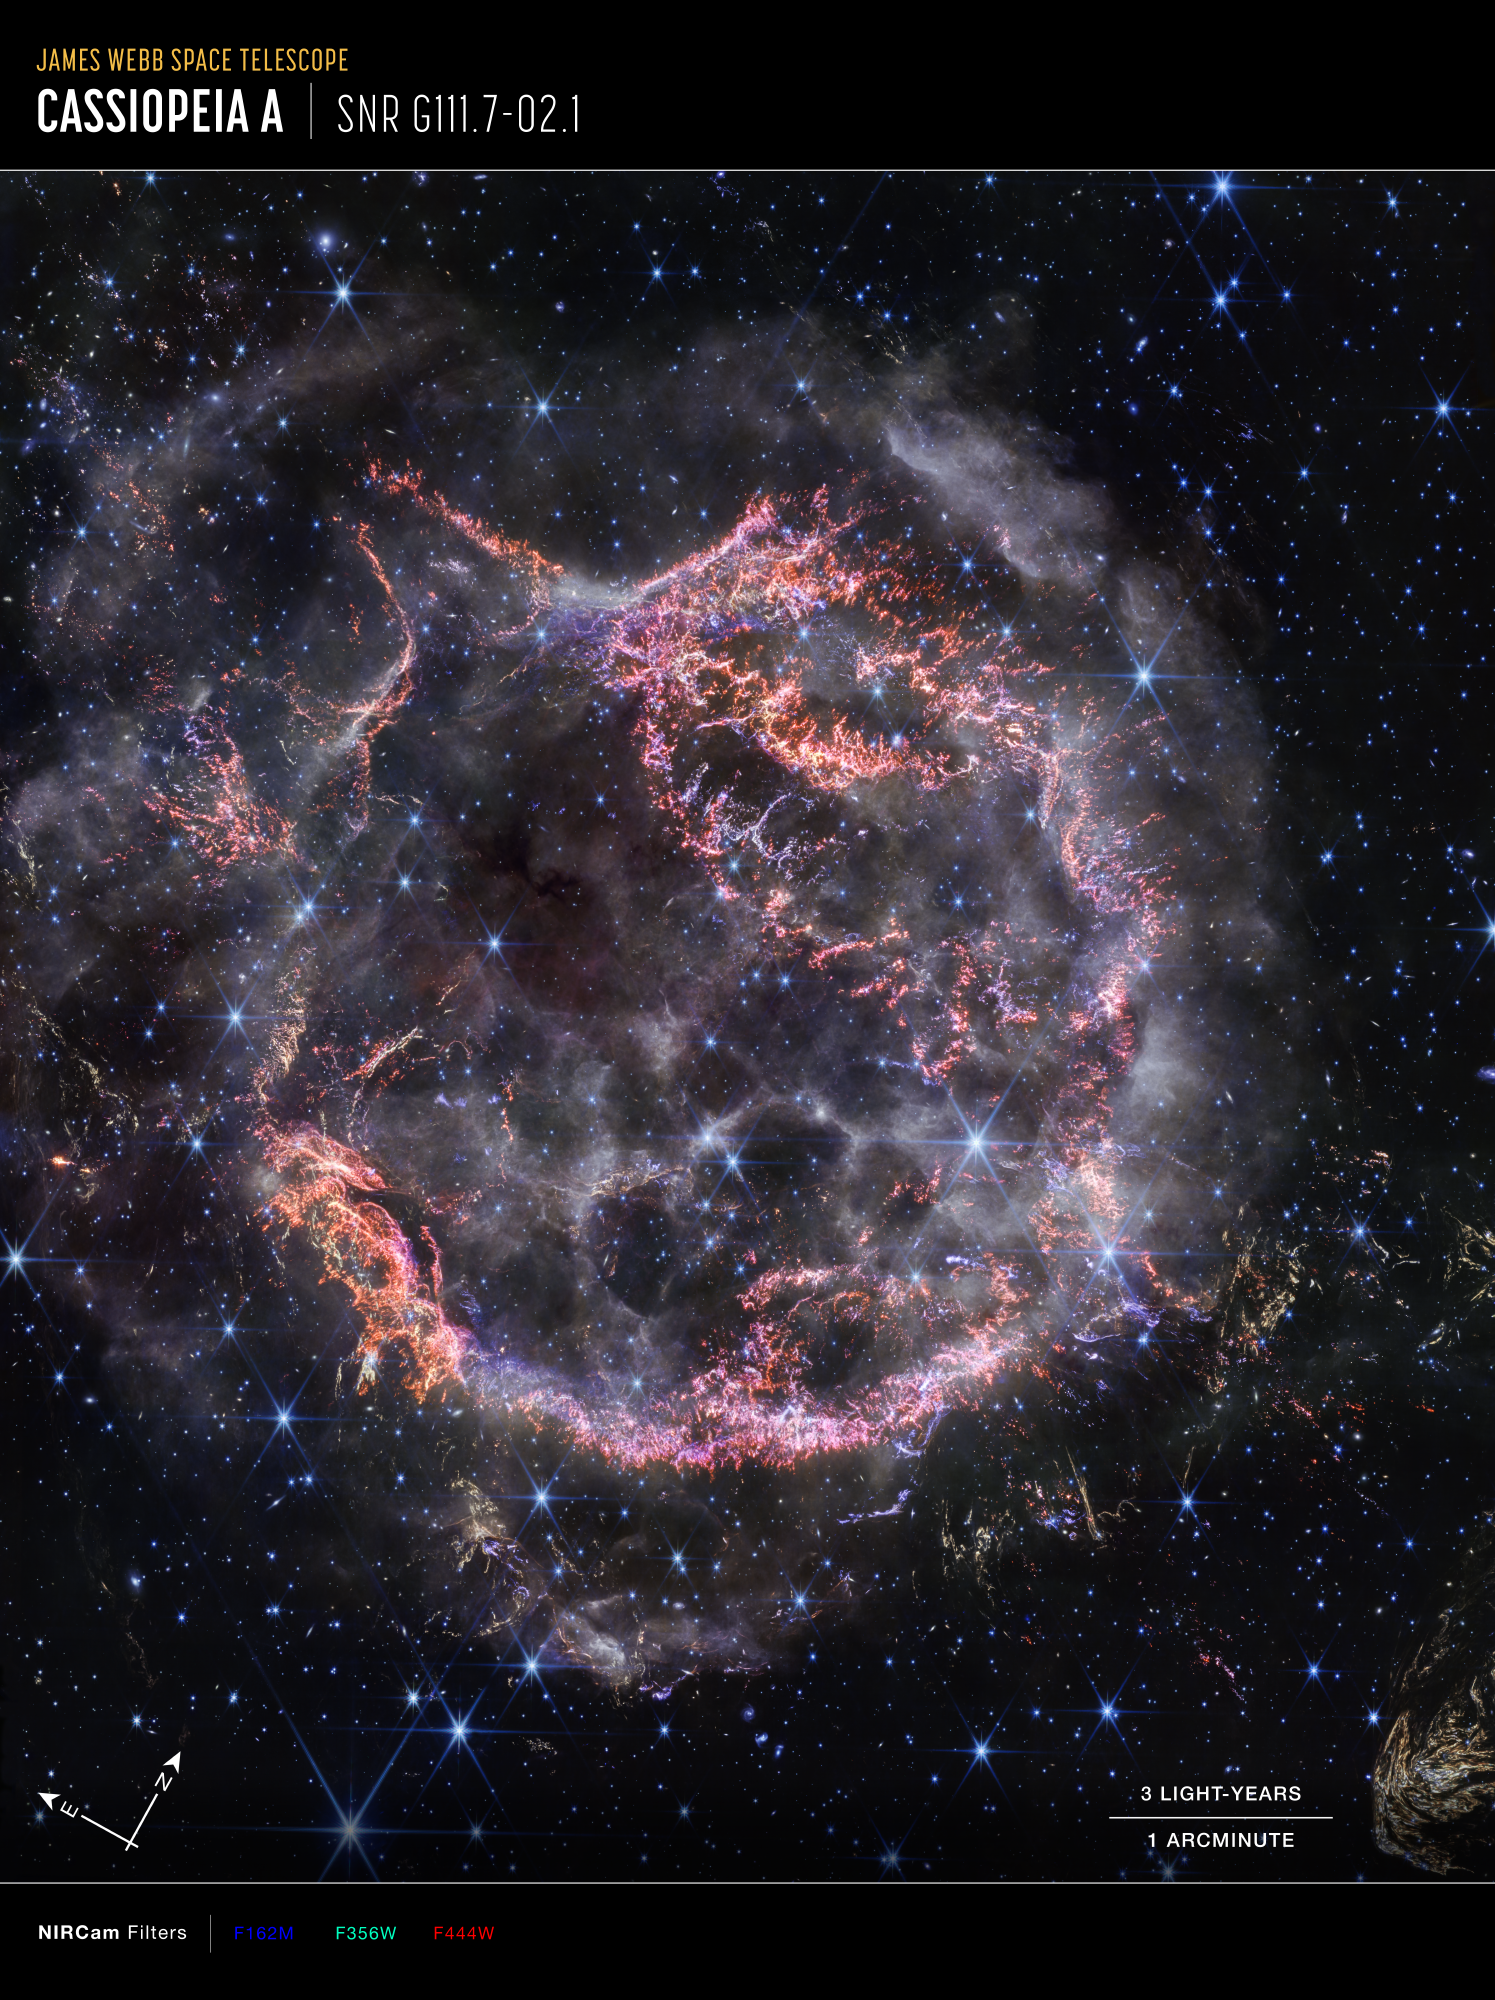 Pictured: The remnants of the Cassiopeia A (Cas A) supernova explosion, imaged in near-infrared light by the Webb Telescope's NIRCam.  The direction in the sky is determined - the directions in the sky are NE (northeast), and the scale of the image is at a distance of 11,000. St. Where this supernova exploded and the colors were translated from infrared radiation invisible to humans to the known colors of the visible spectrum.  Source: NASA, ESA, CSA, STScI, D. Milisavljevic (Purdue University), T. Temim (Princeton University), I. De Looze (Ghent University)